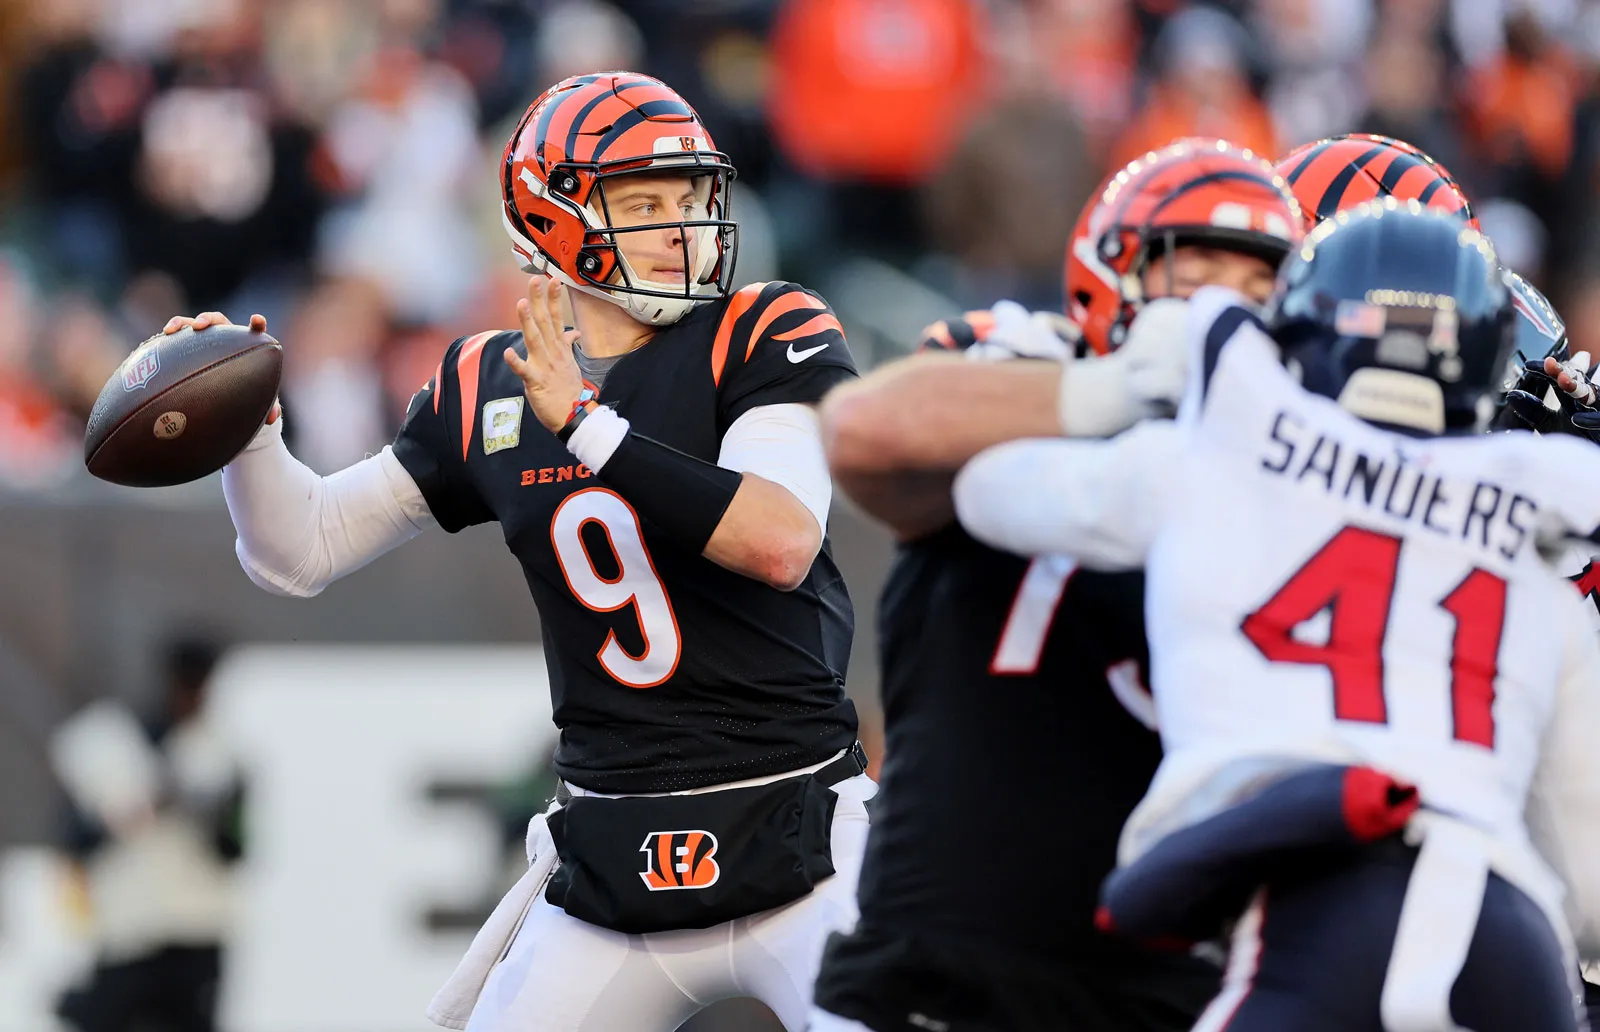 Bengals Stars Want Out Trey Hendrickson and Tee Higgins Shake Up Team Plans Right Before NFL Draft